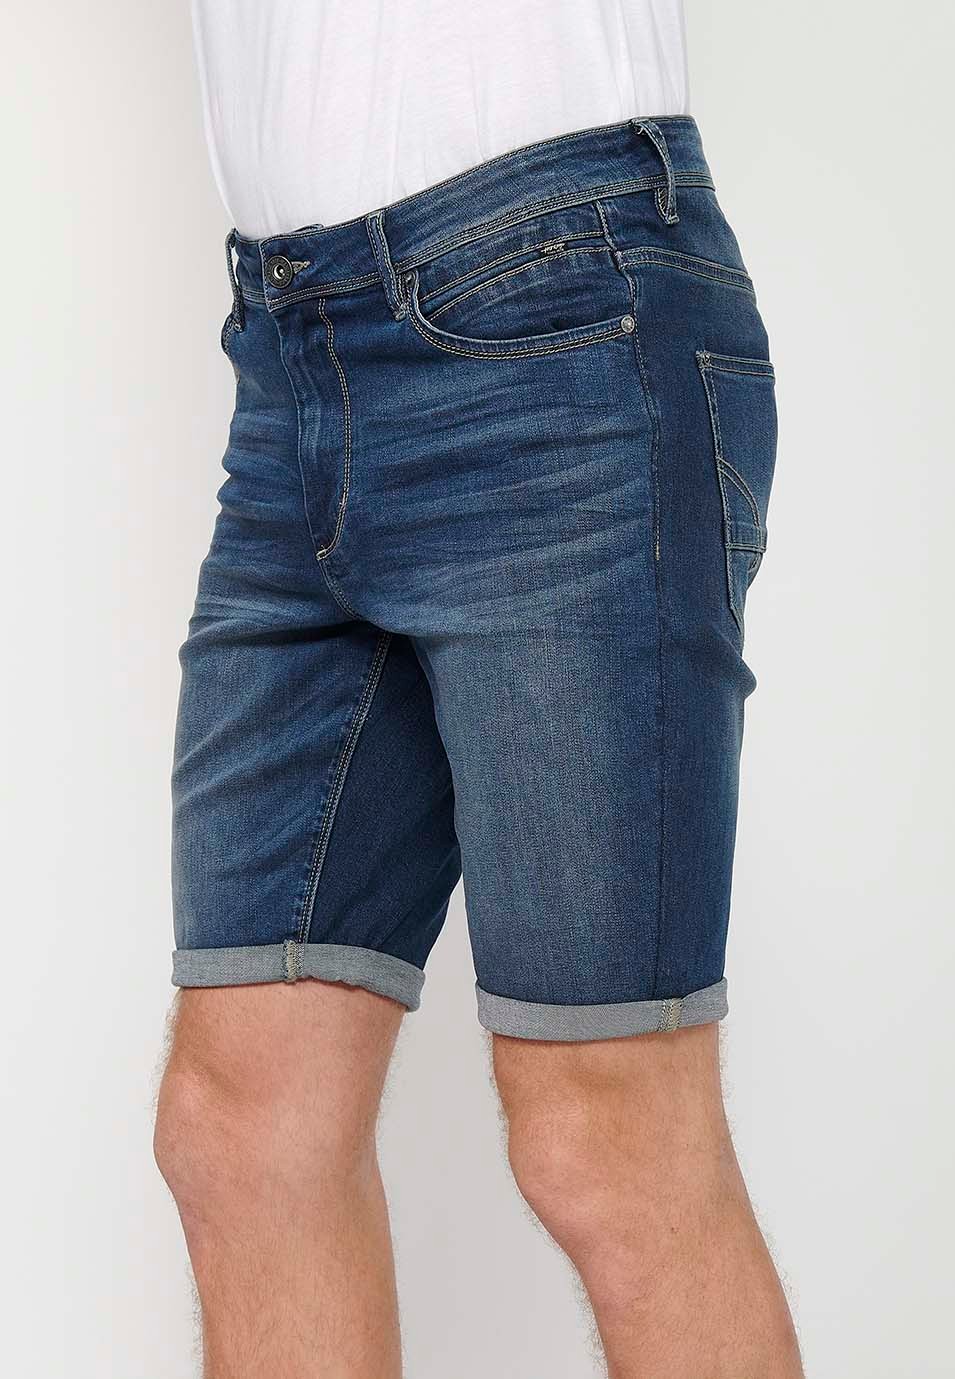 Blue Denim Bermuda Shorts with Turn-Up Finish and Front Zipper and Button Closure for Men 5